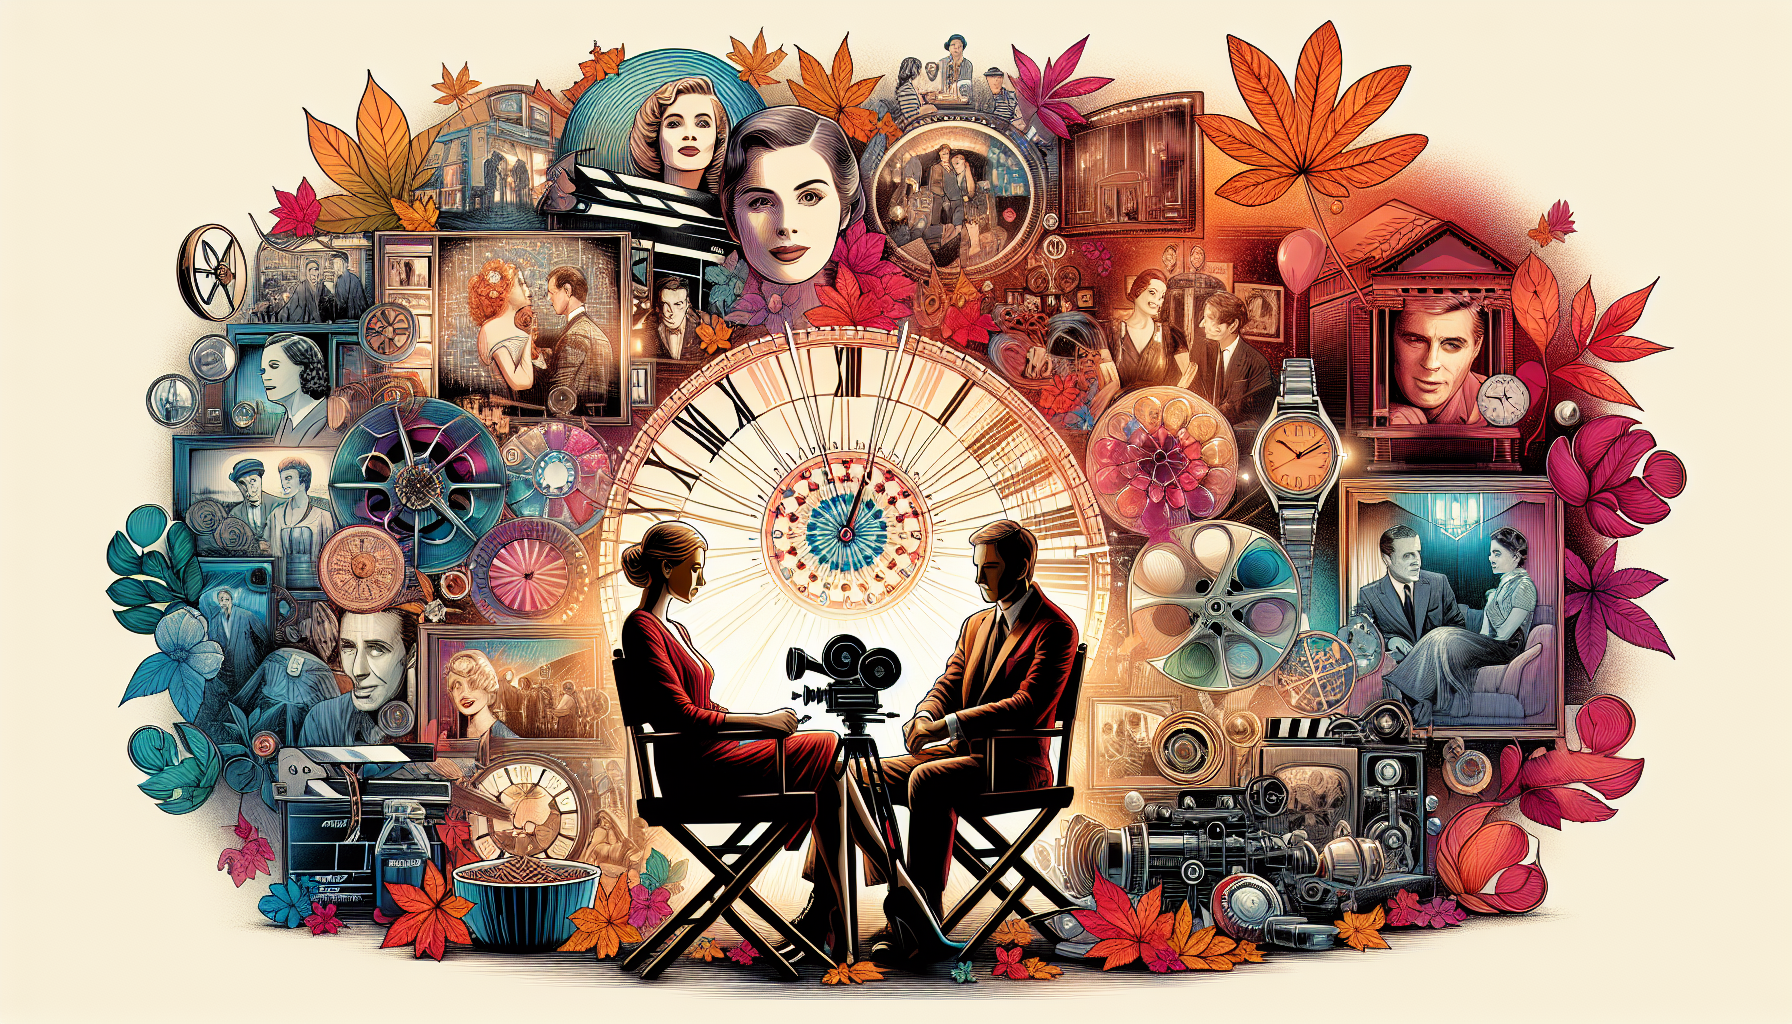 An artistic collage featuring Nora Ephron and Richard Linklater sitting in a cozy, vintage film theater, surrounded by iconic scenes and romantic elements from their movies, such as falling autumn lea